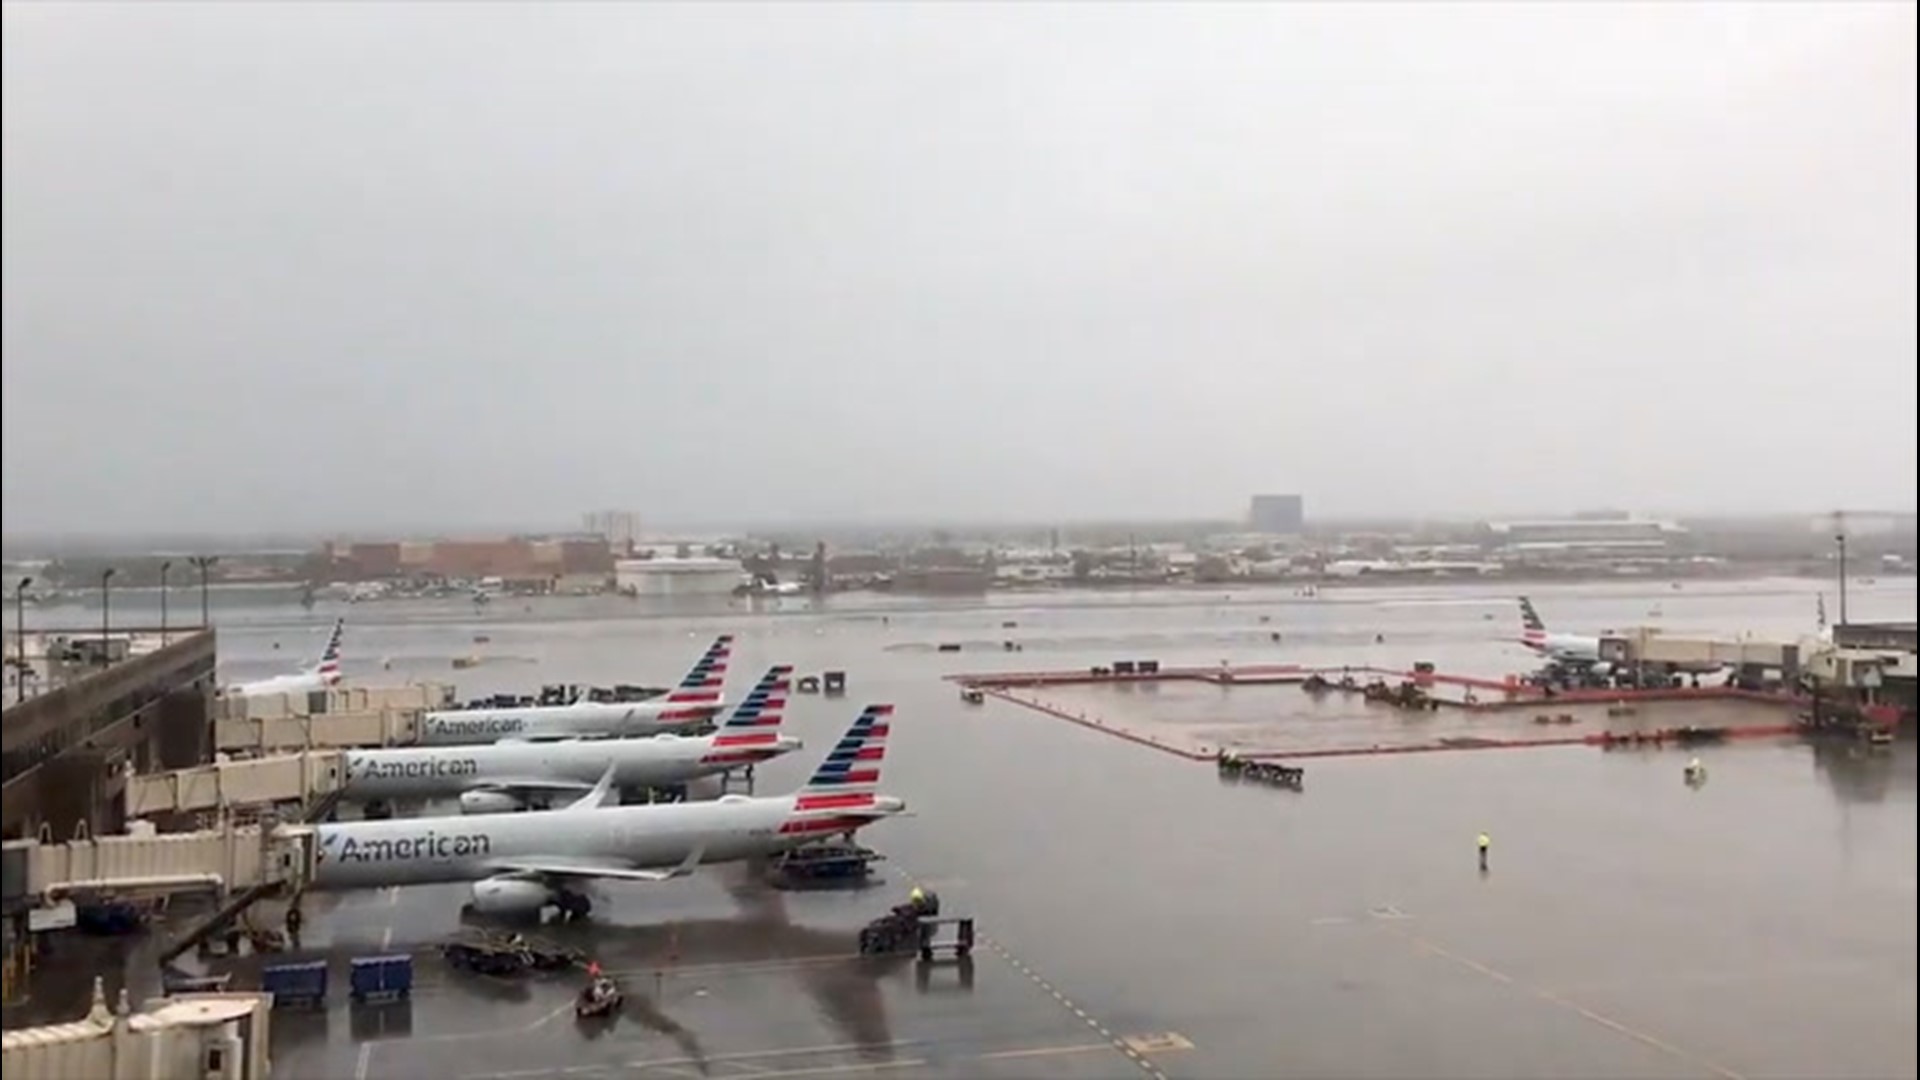 Thunderstorms rolled over Phoenix, Arizona, on Feb. 22, drenching the city in a record 0.72 of an inch for the day.